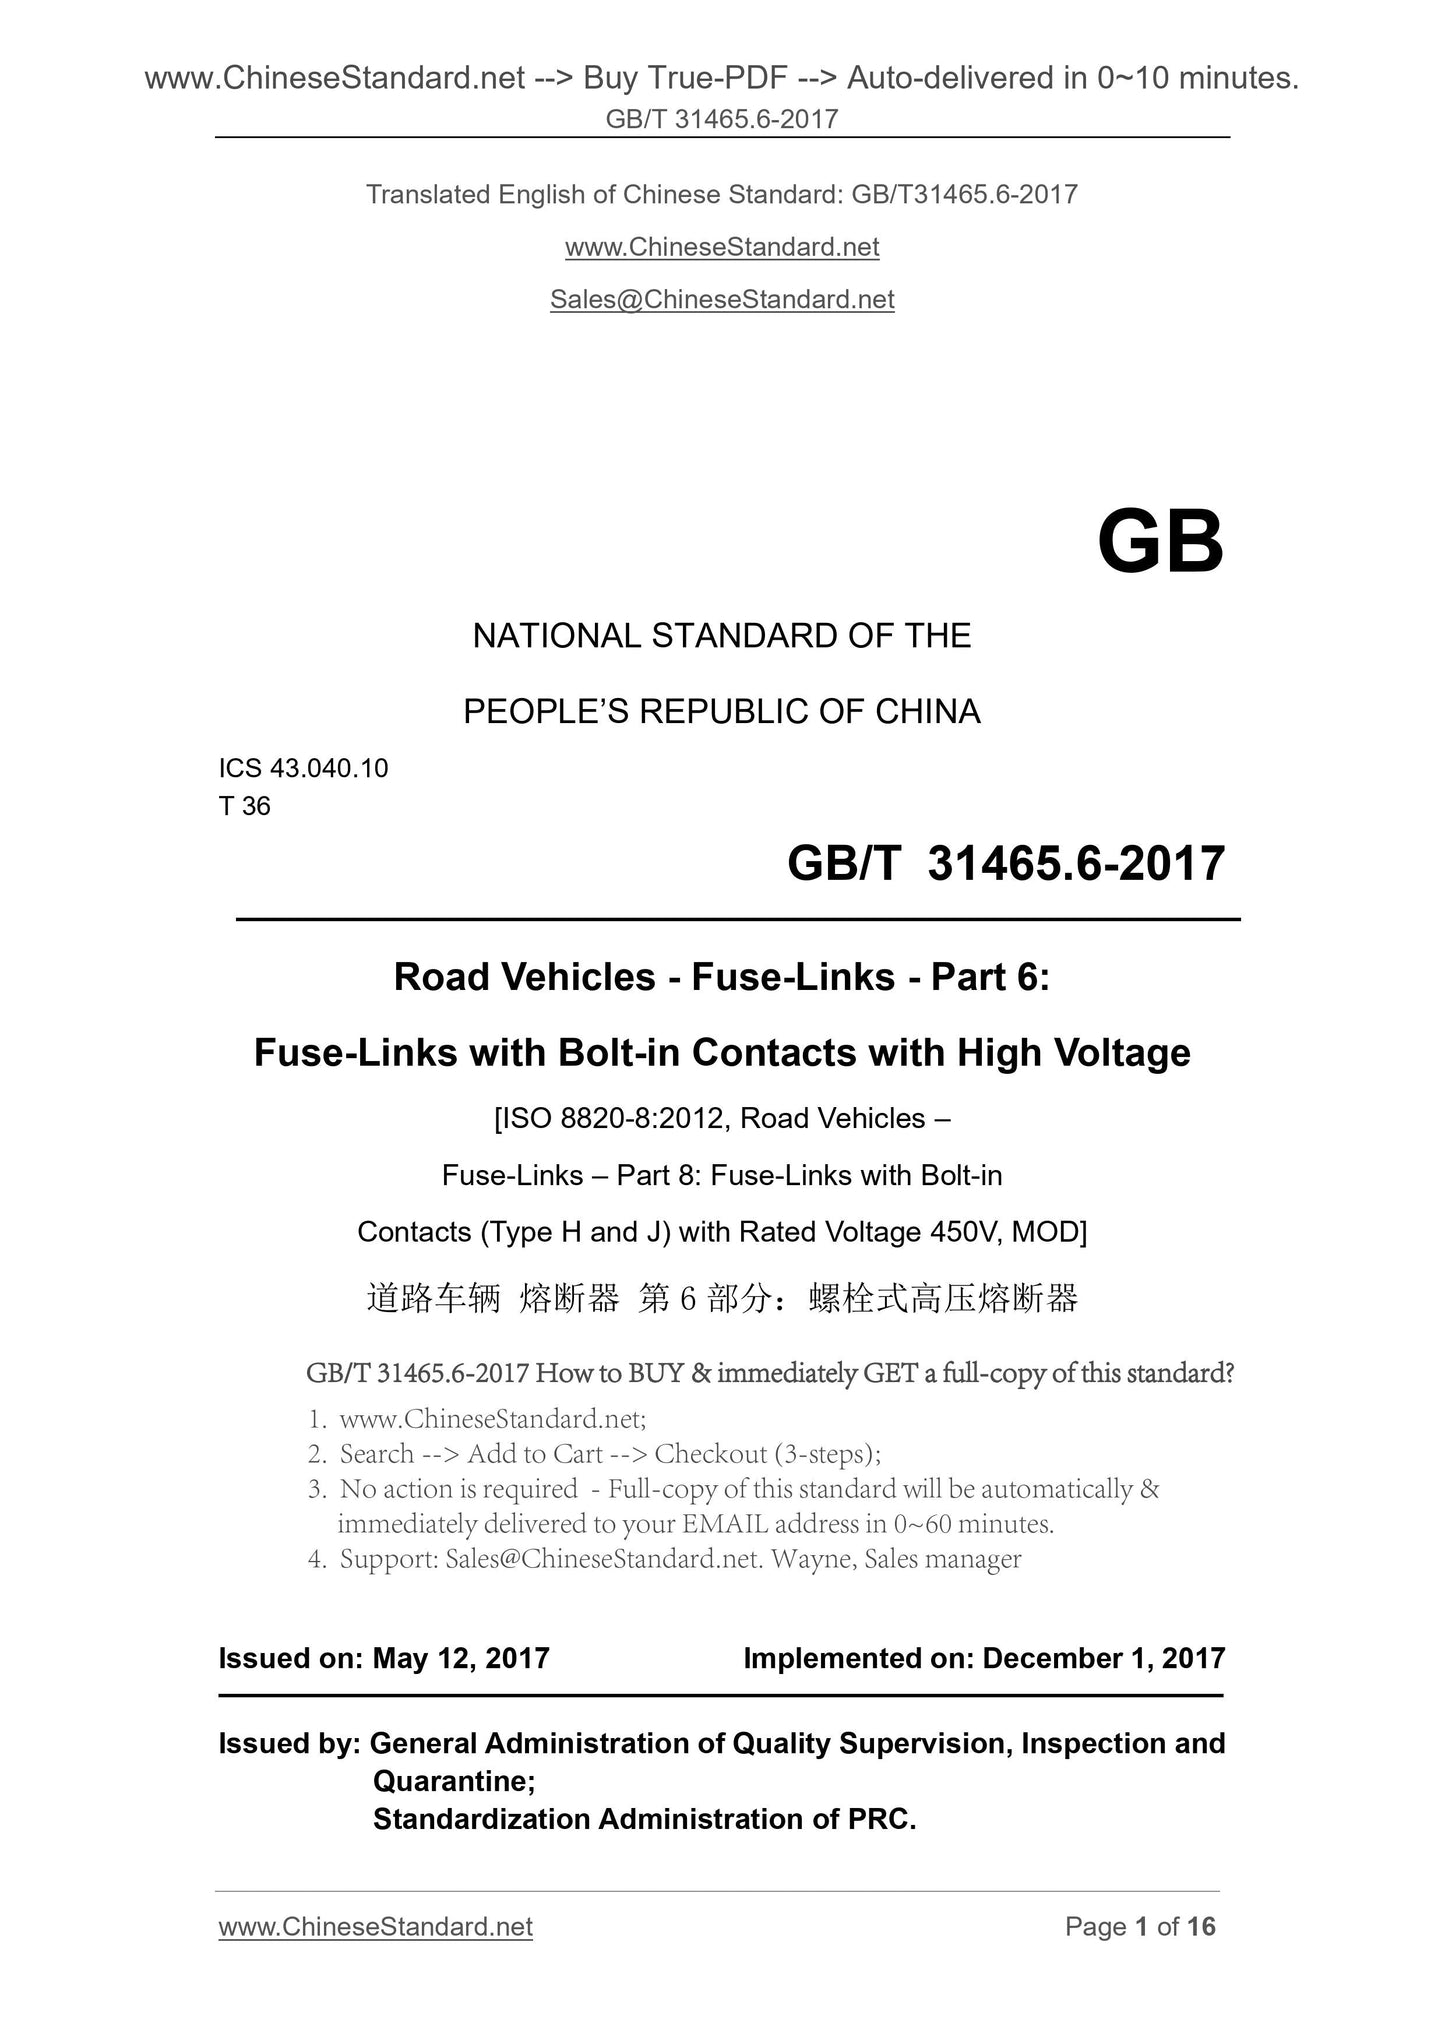 GB/T 31465.6-2017 Page 1